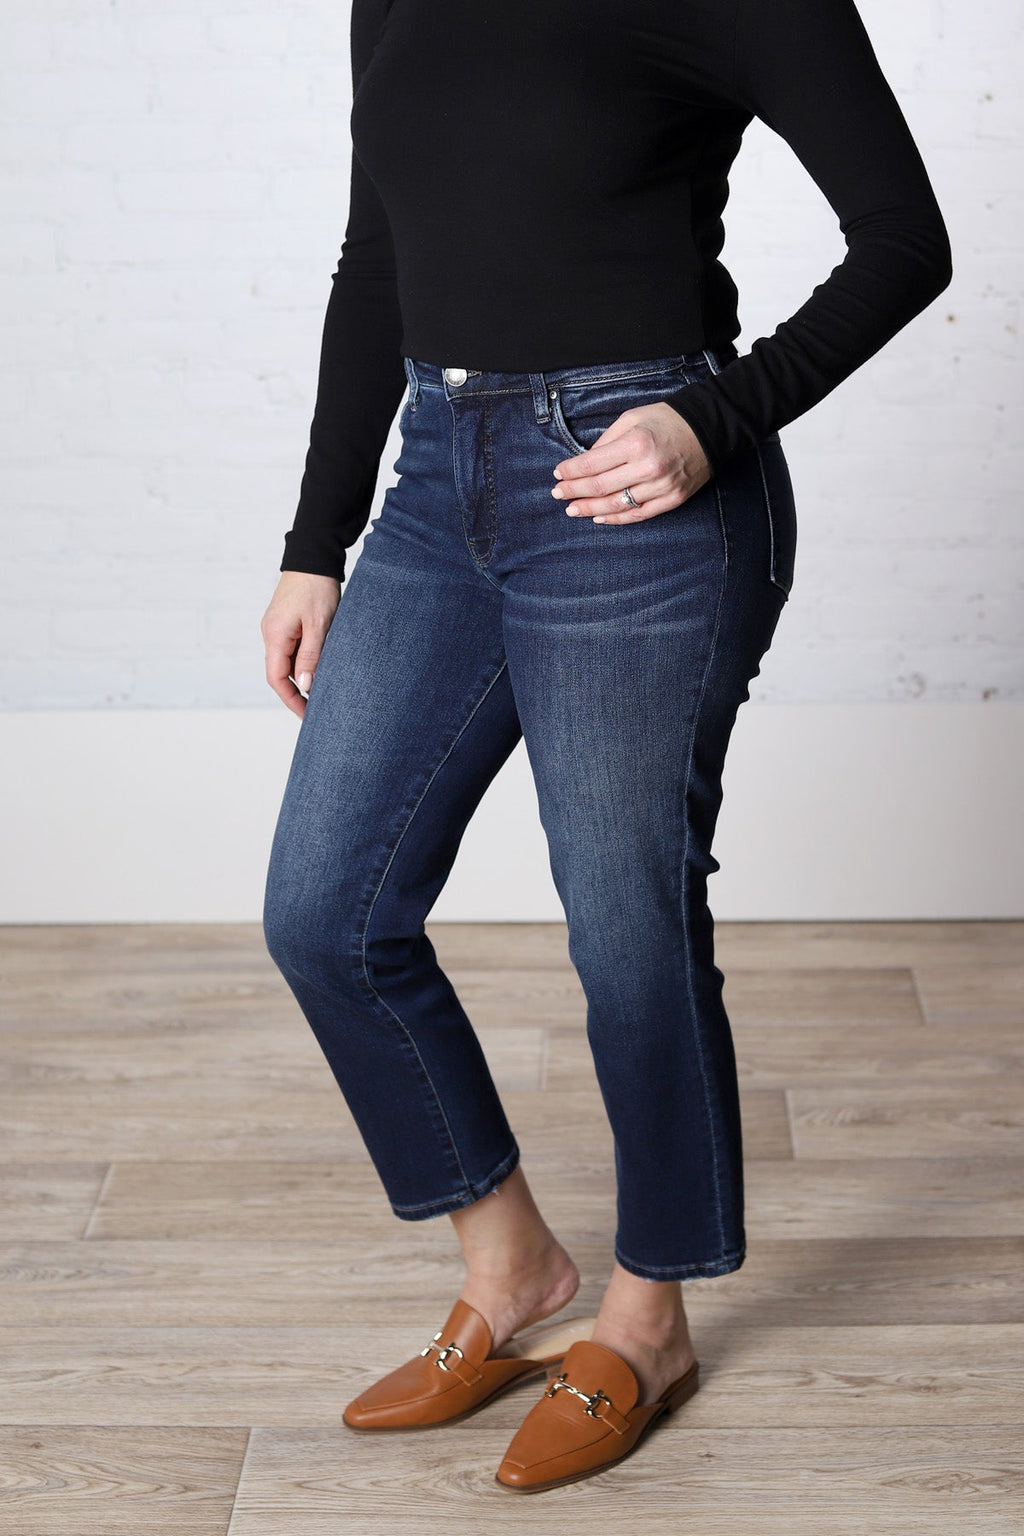 Don't Think Twice DTT Katy high waist cropped straight jeans in washed  black - ShopStyle